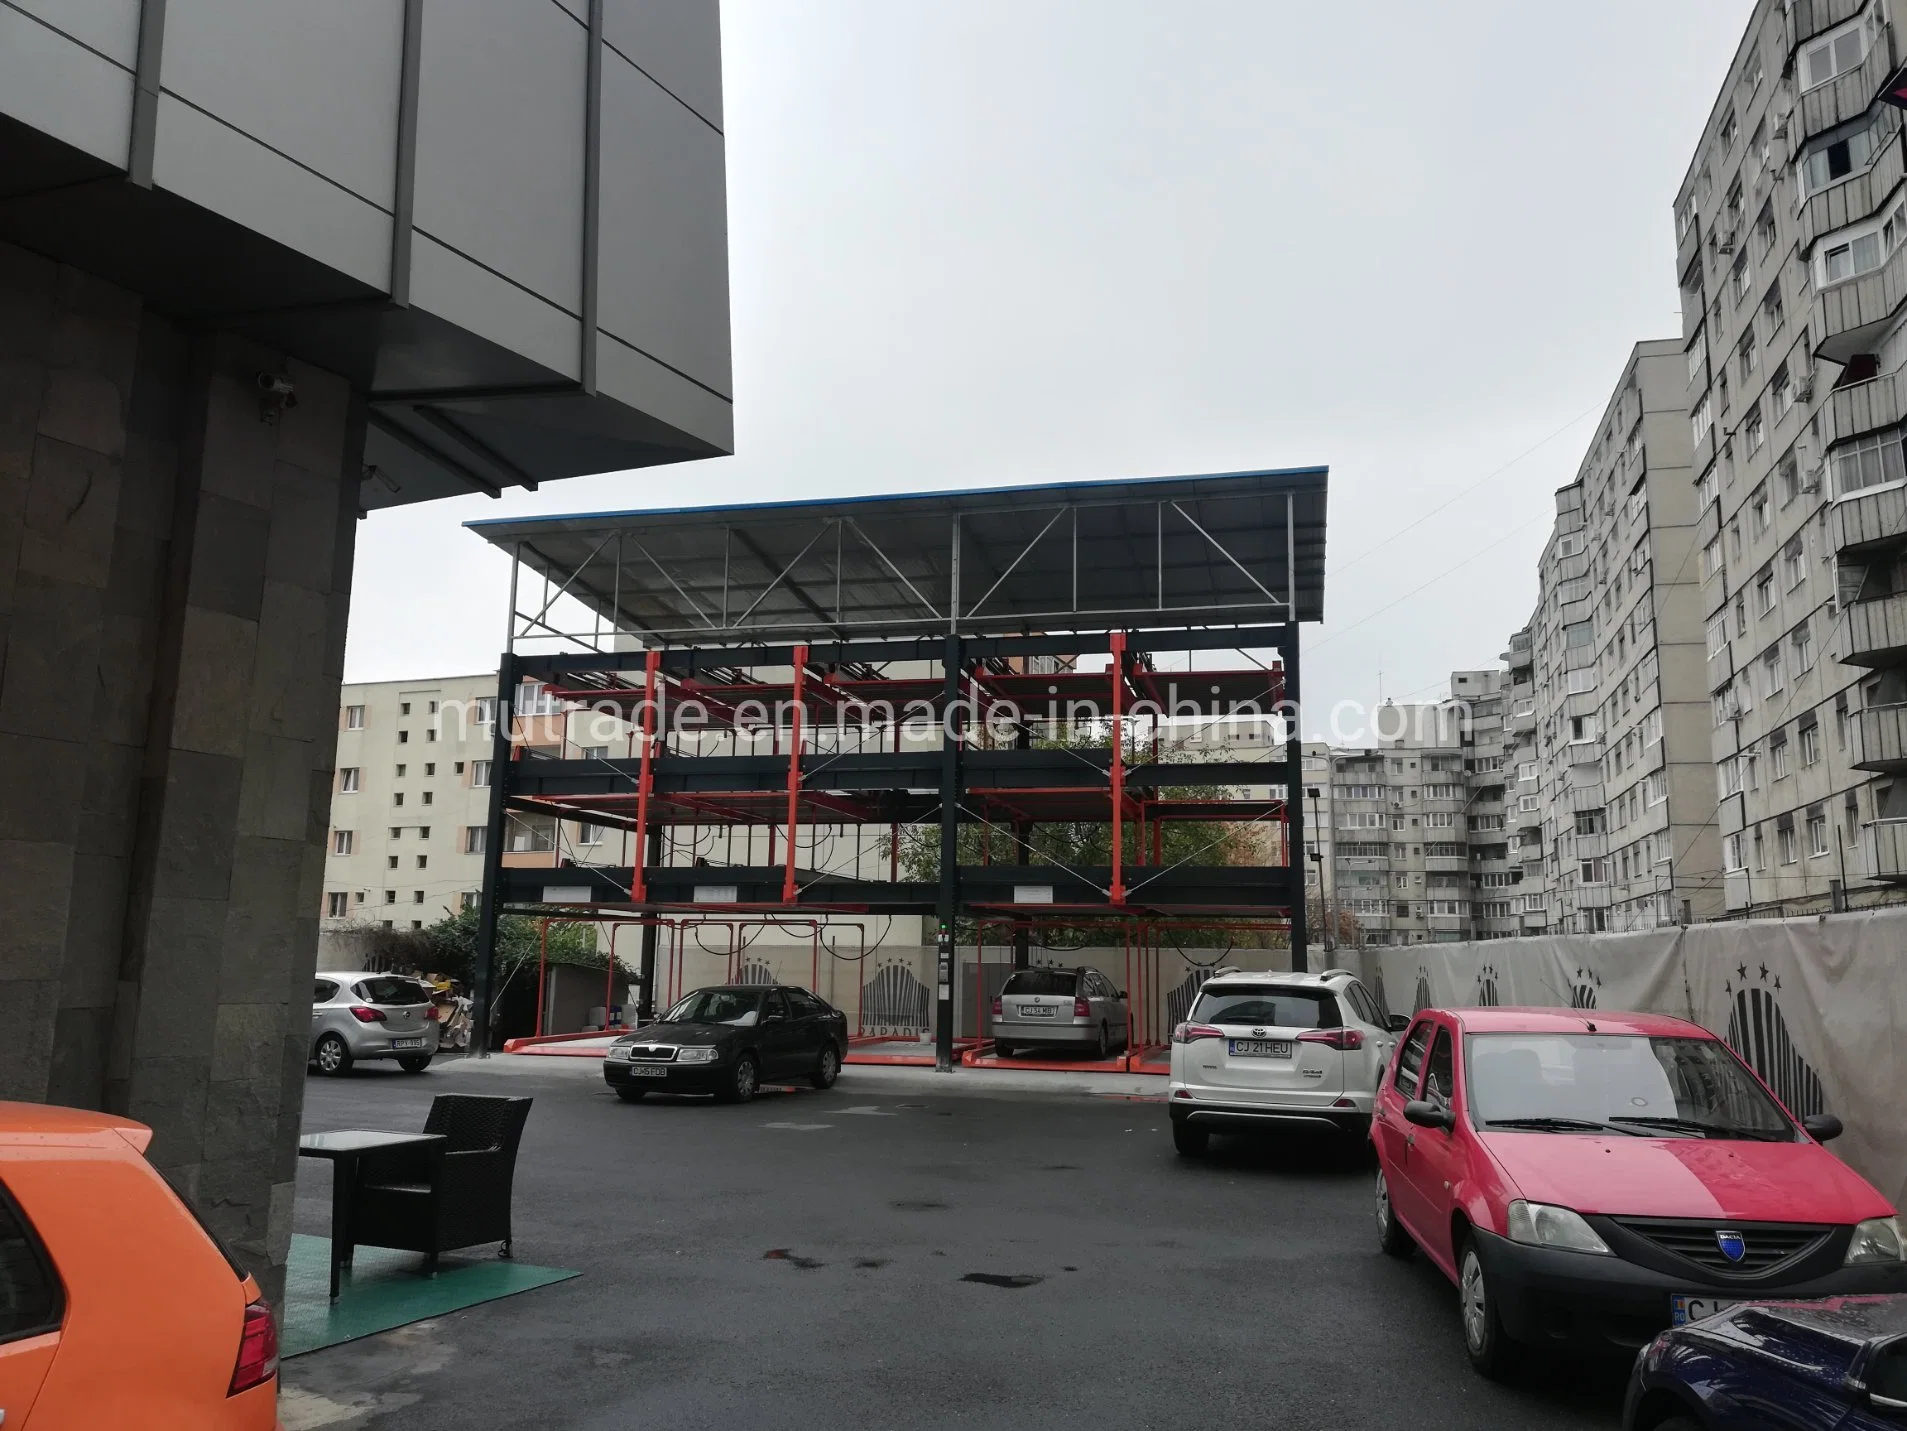 Automated Puzzle Car Park Lift Hydraulic Elevator Smart Parking System